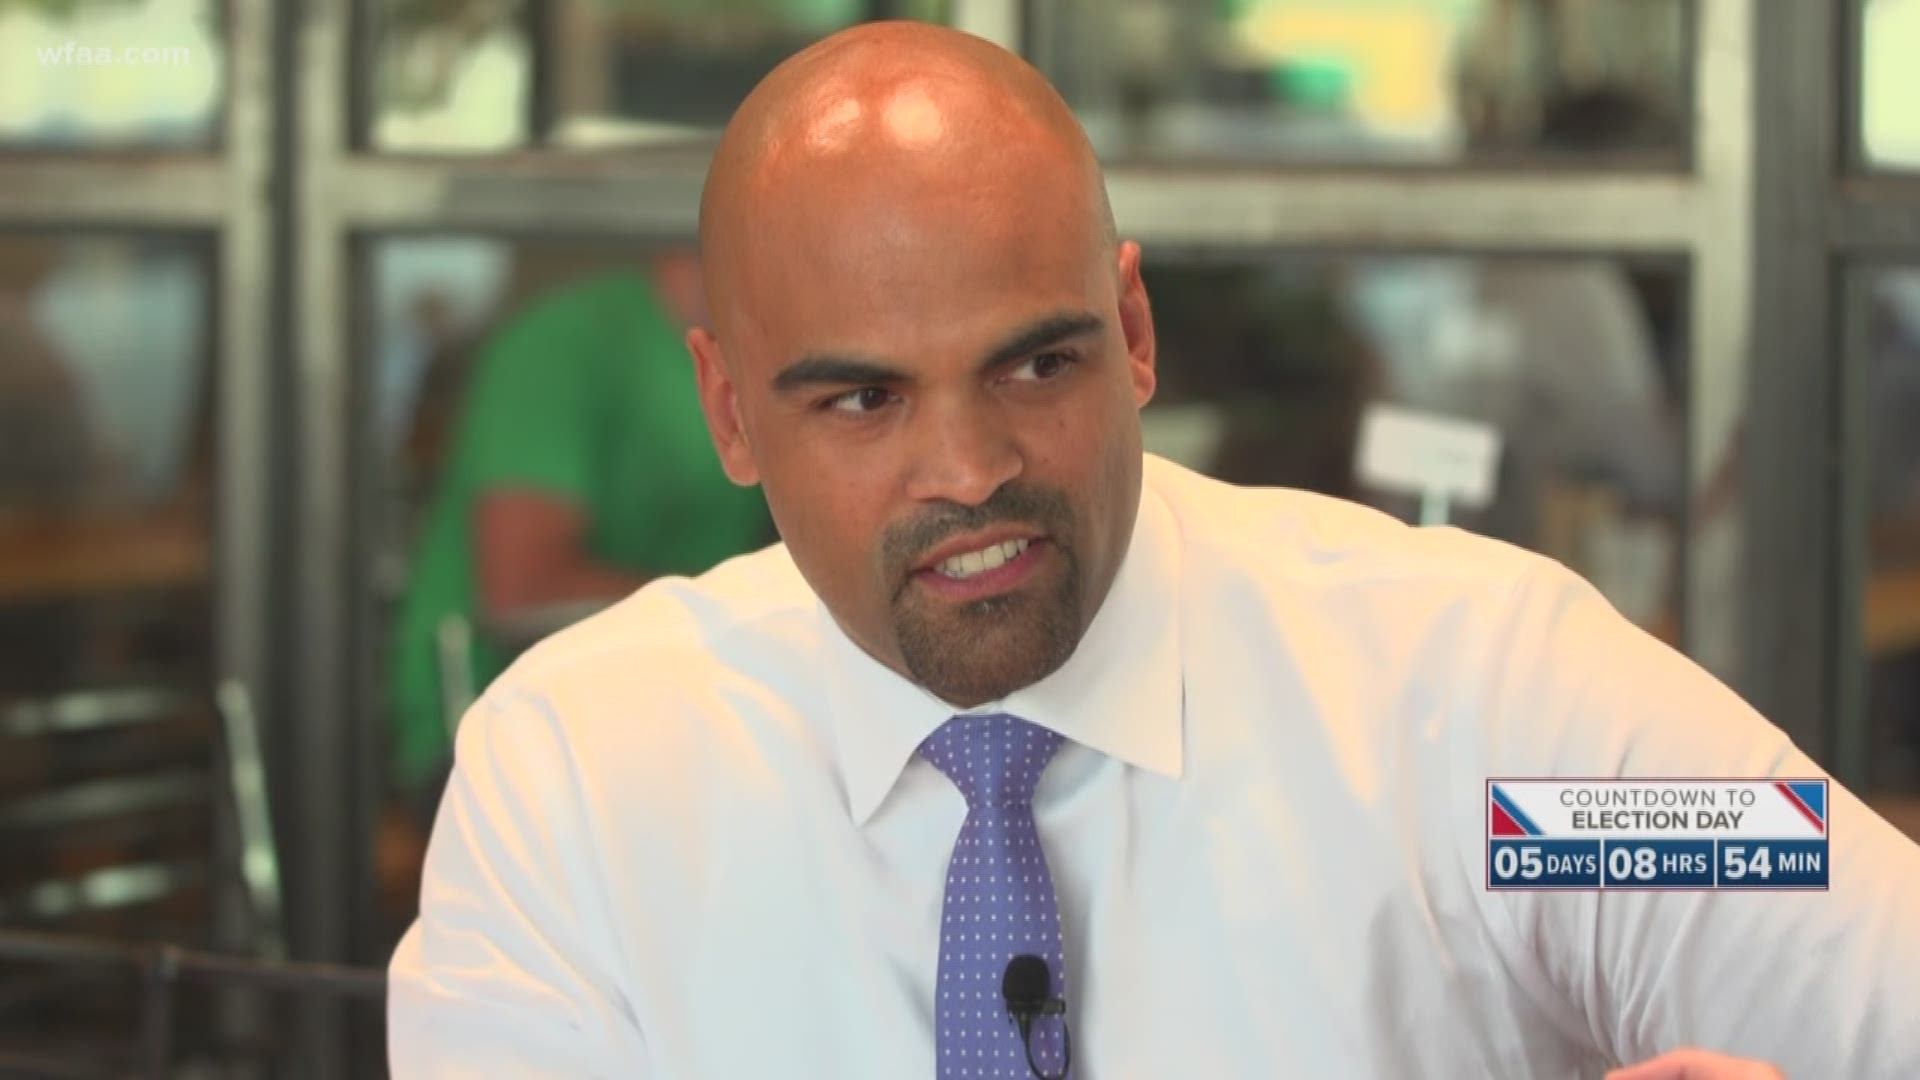 Pete Sessions and Colin Allred are trading attack ads on television right now in what many expect to be a close congressional race. But what are these two men really like outside the polished image from campaign consultants?